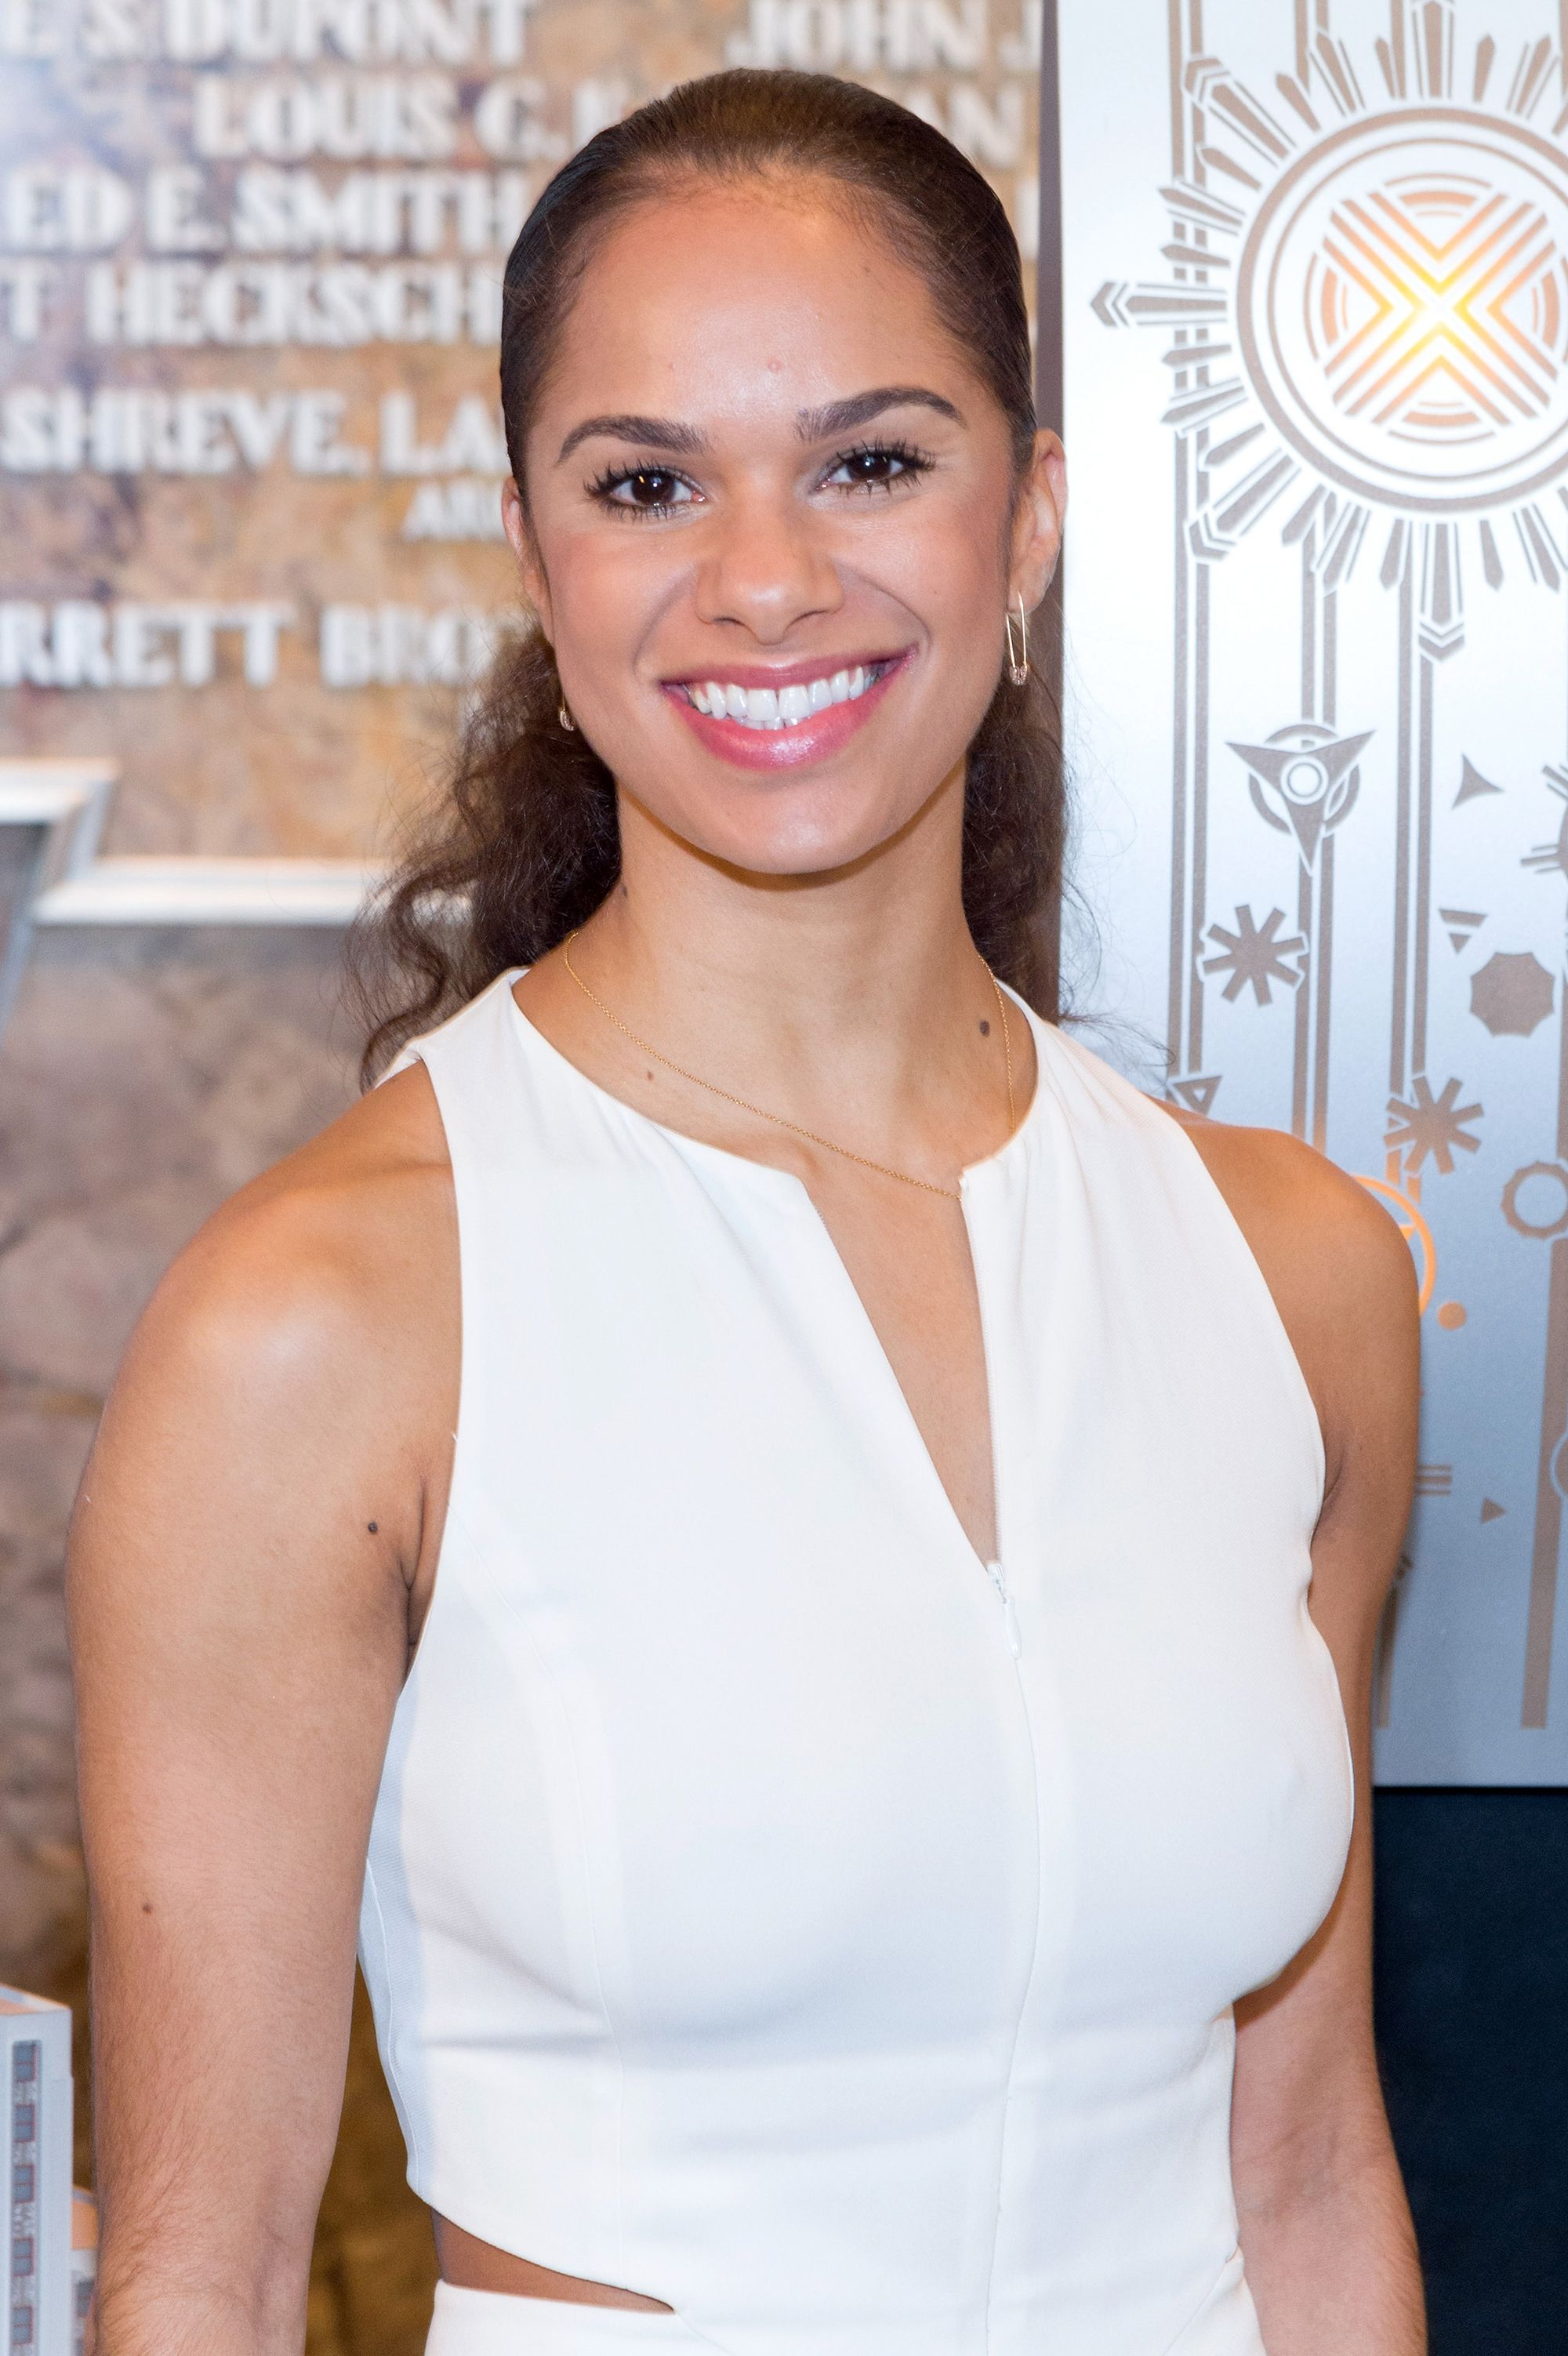 A First Look At Misty Copeland's Under Armour Collaboration